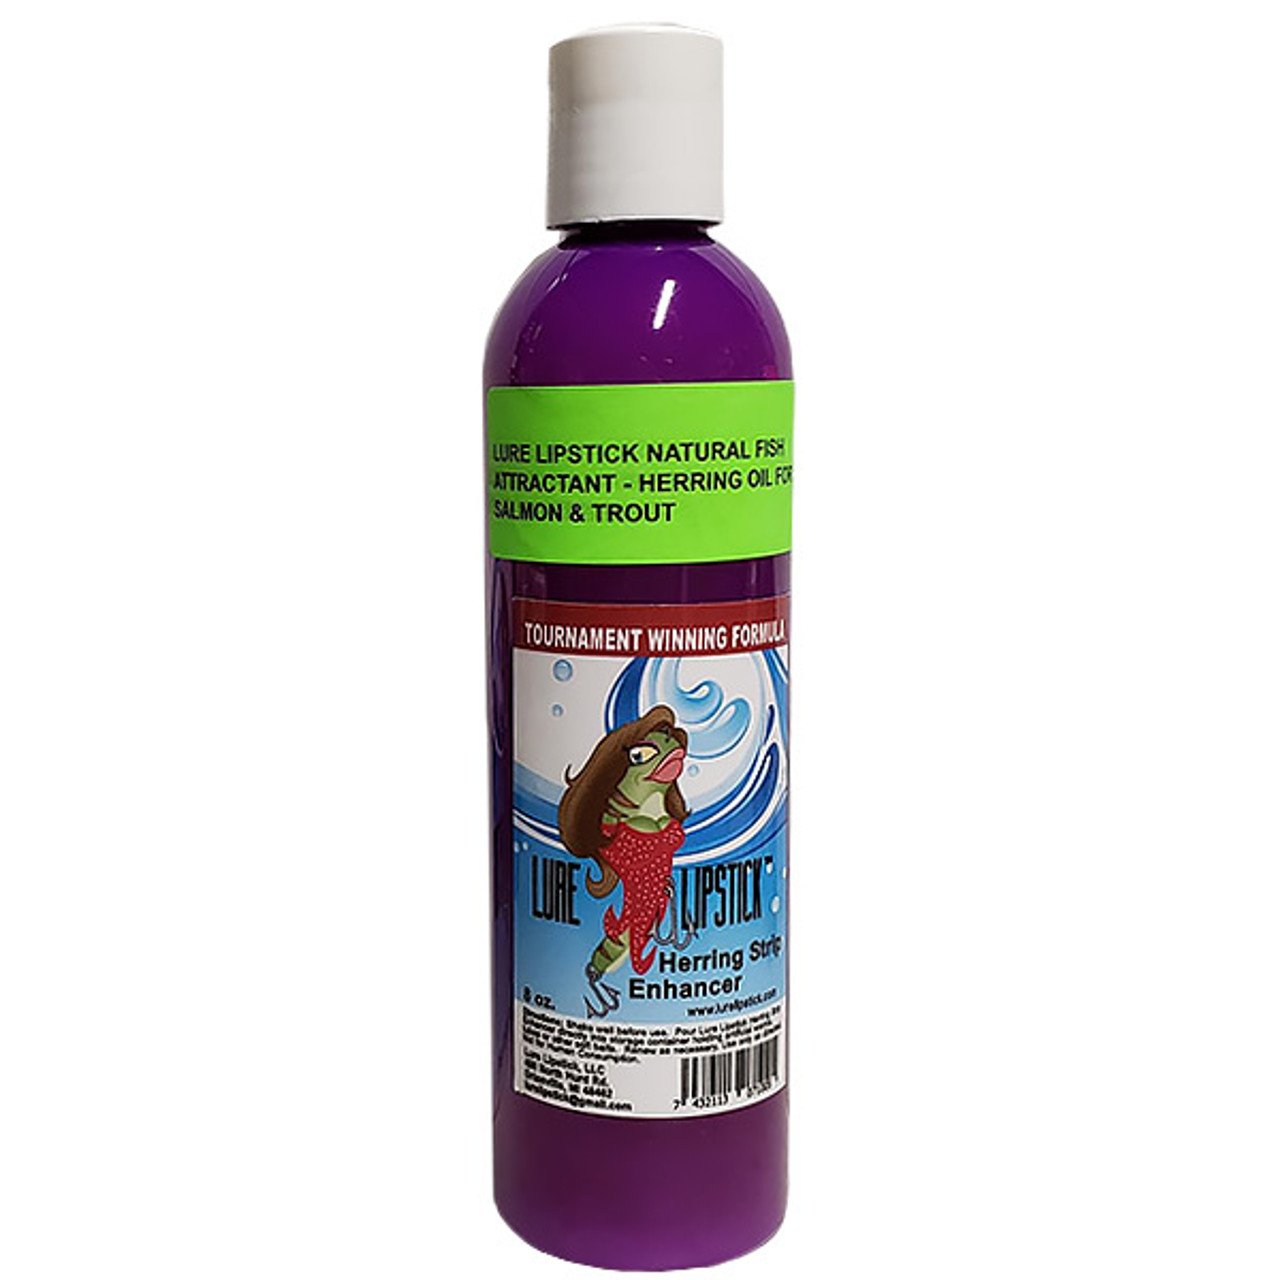 Herring Oil Liquid Enhancer for Salmon and Trout by Lure Lipstick